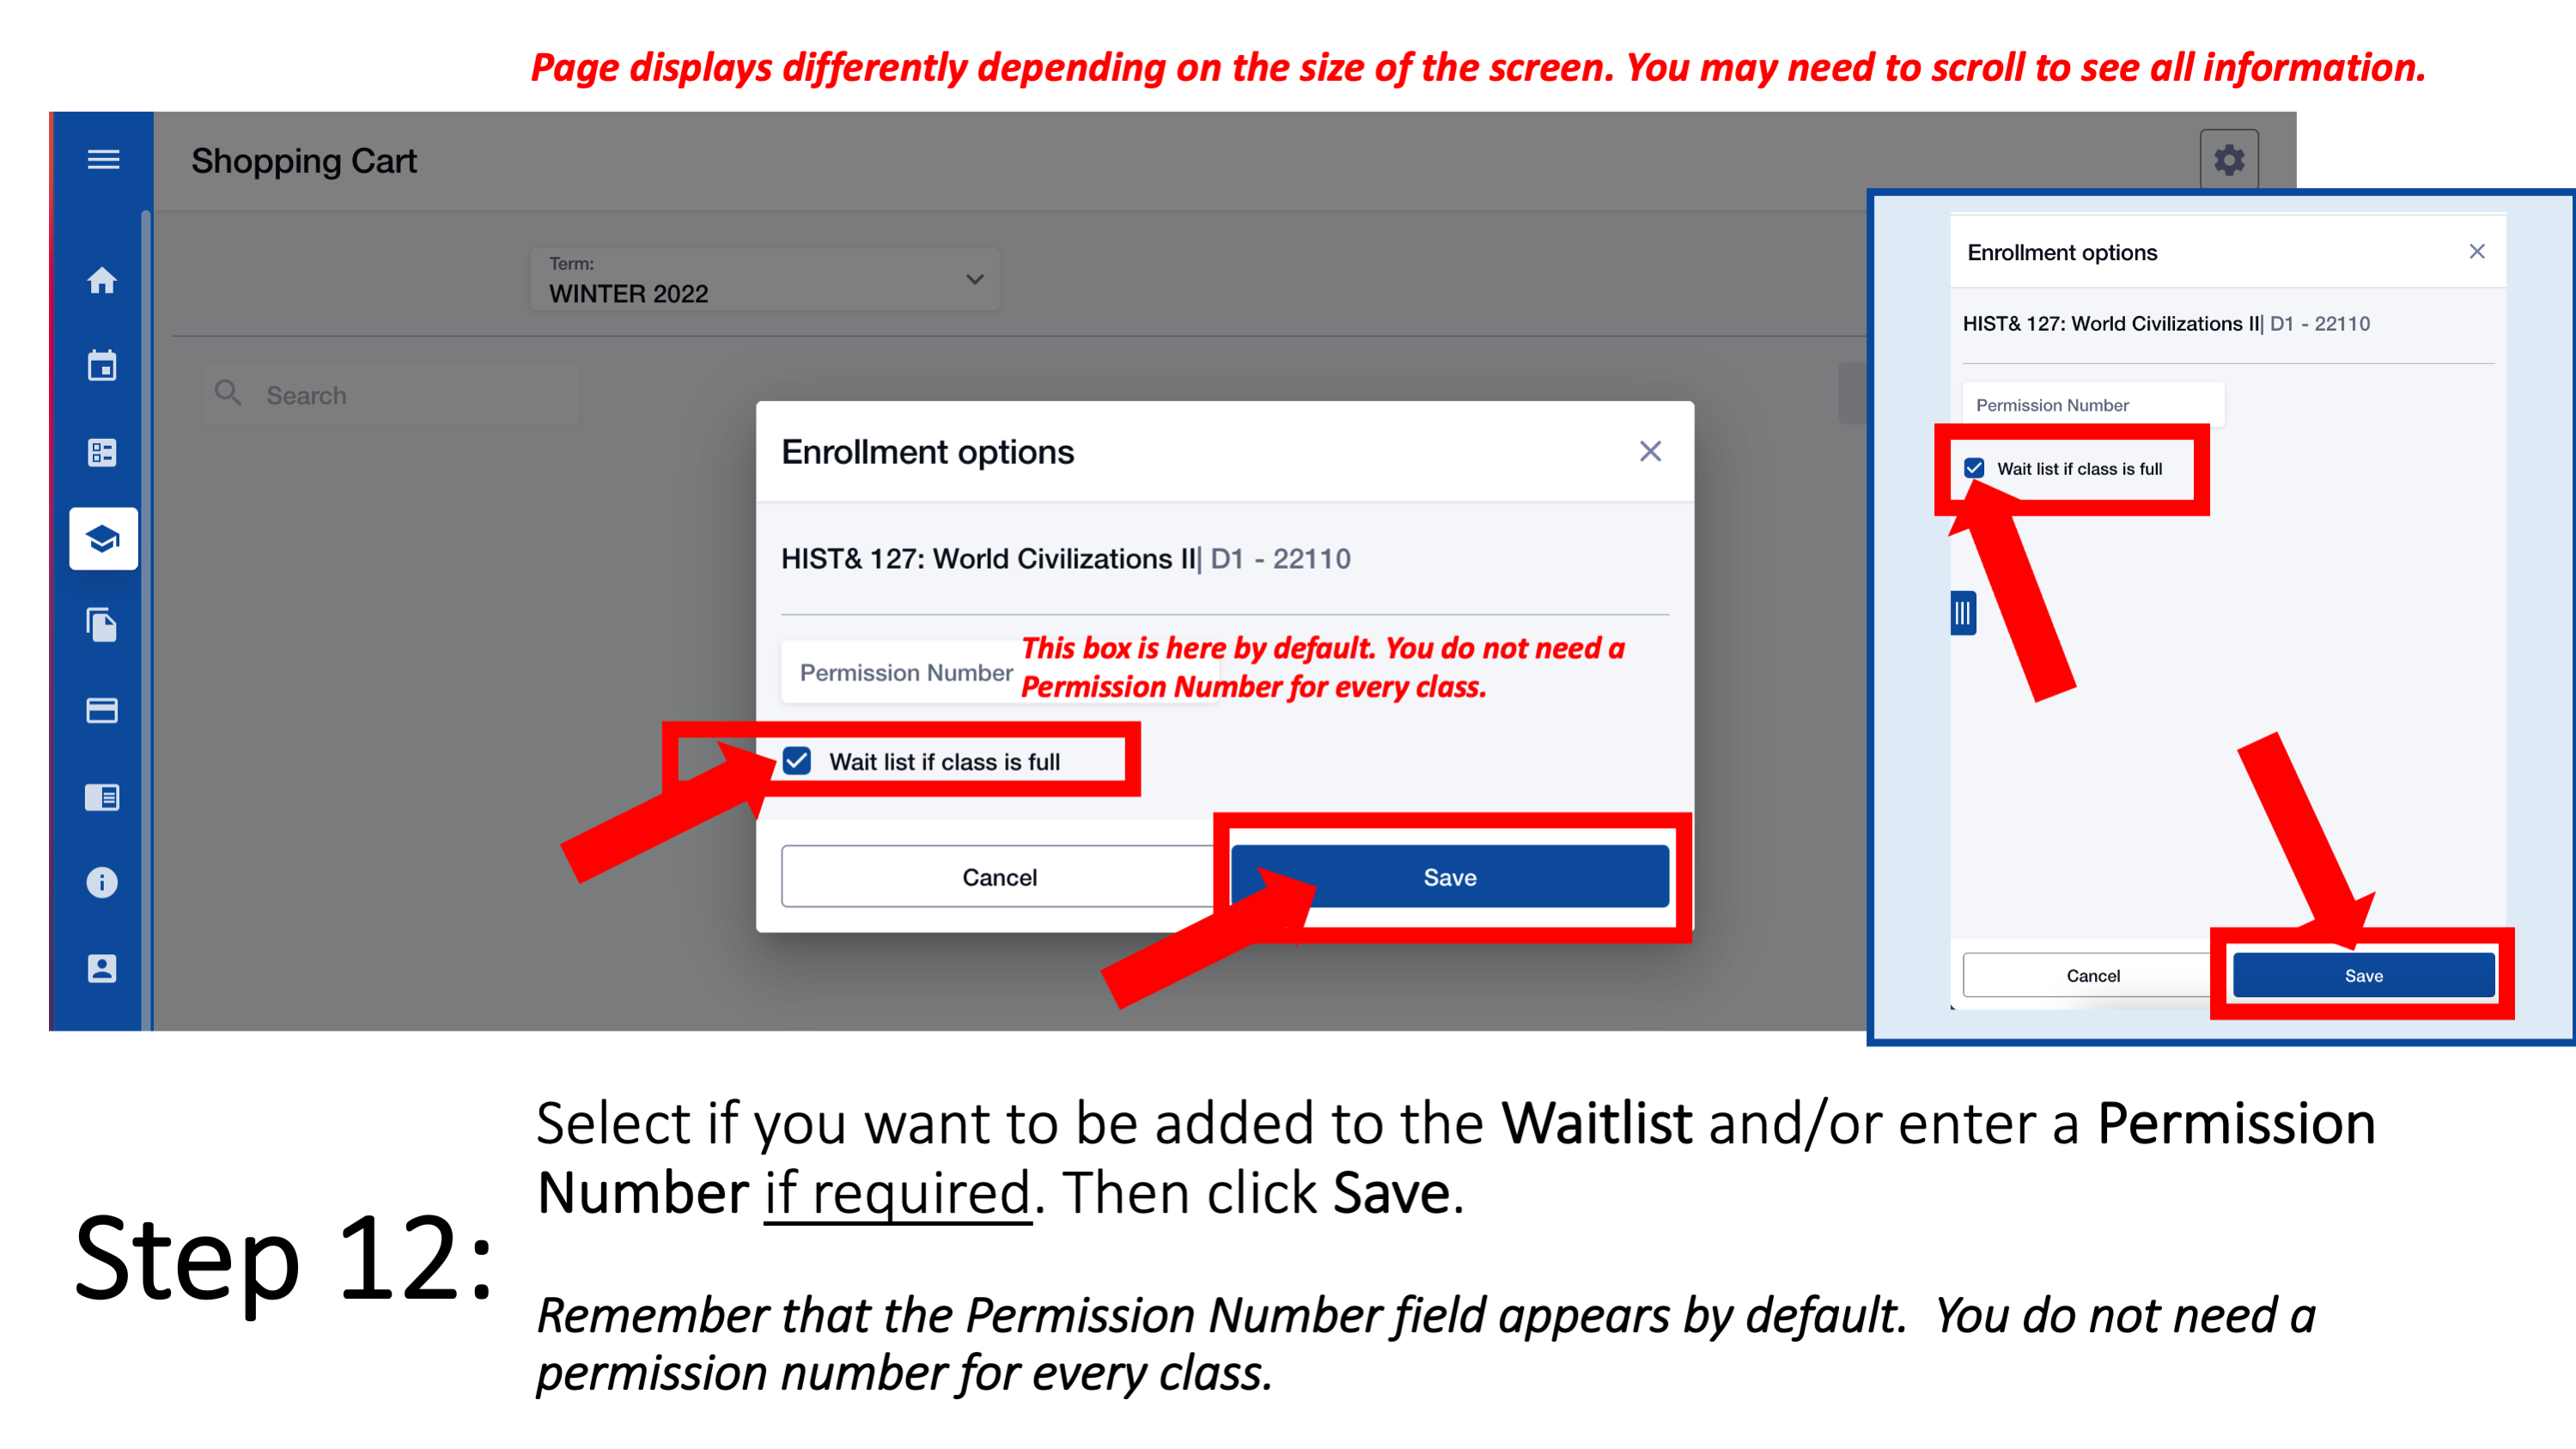 Step 12: Select if you want to be added to the Waitlist and/or enter a Permission Number if required. Then click Save. Remember that the Permission Number field appears by default. You do not need a permission number for every class.